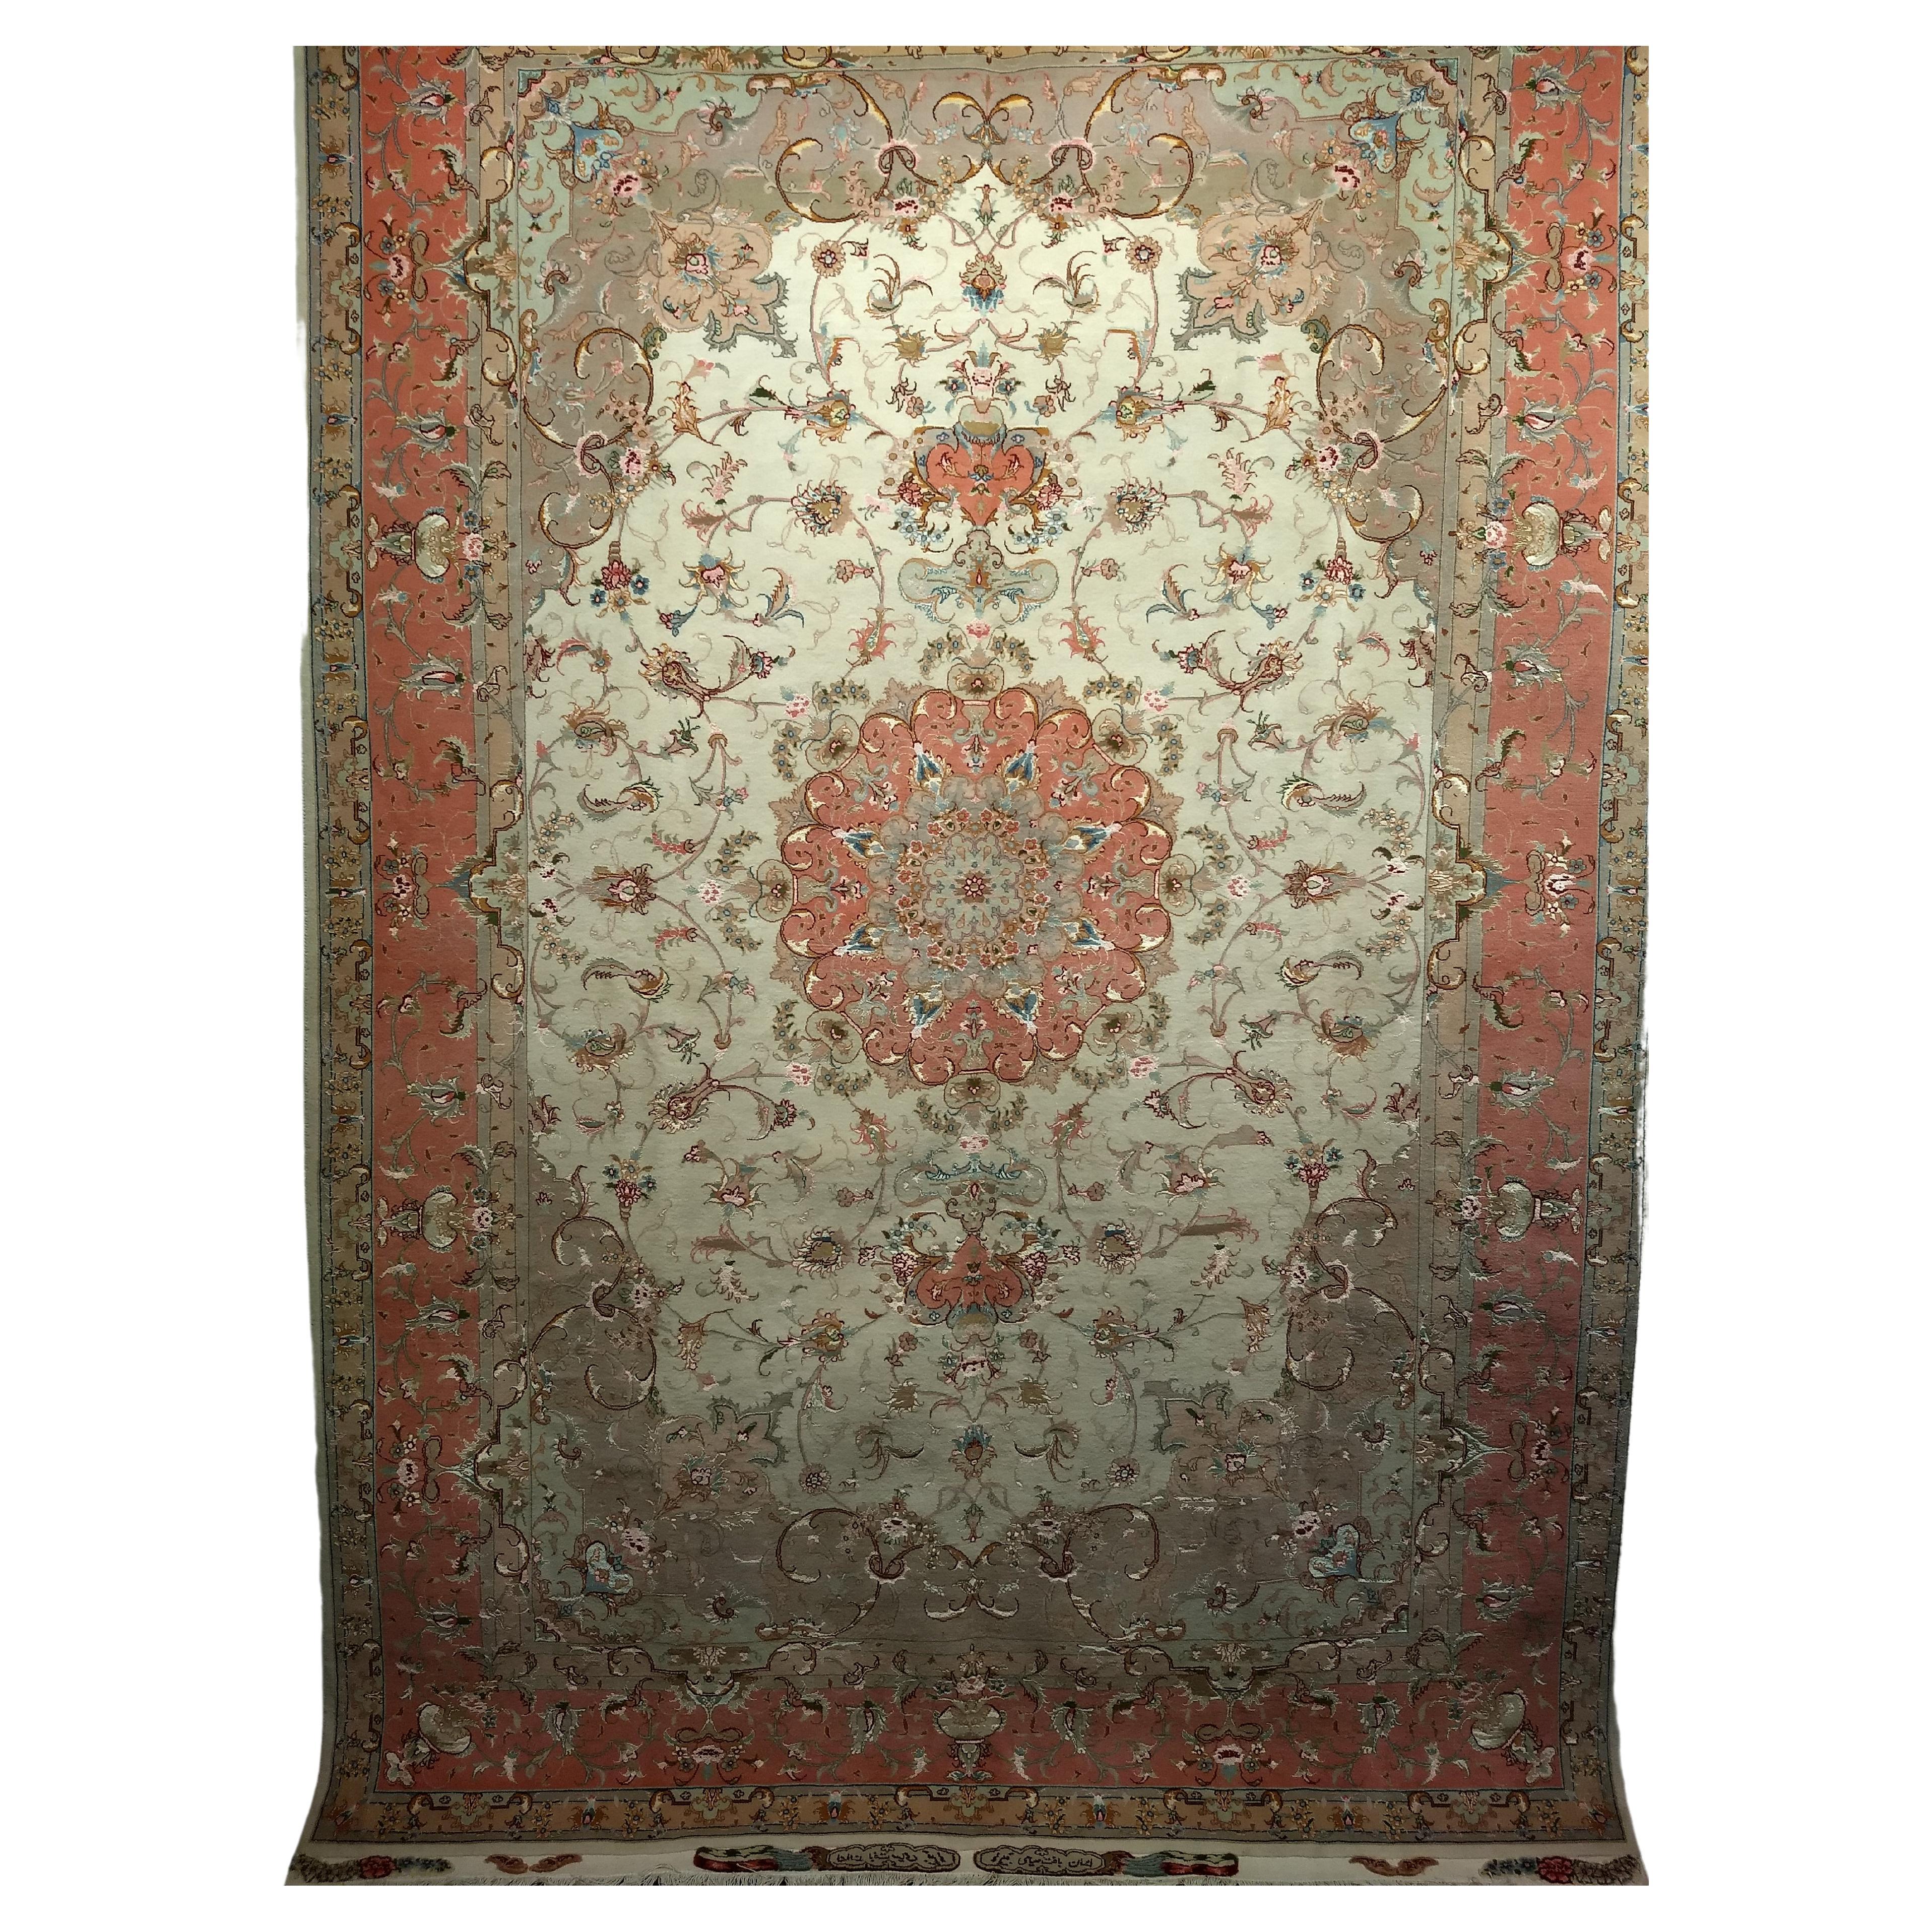 Finely Woven Persian Tabriz Room Size Rug in Floral Pattern in Ivory, Salmon